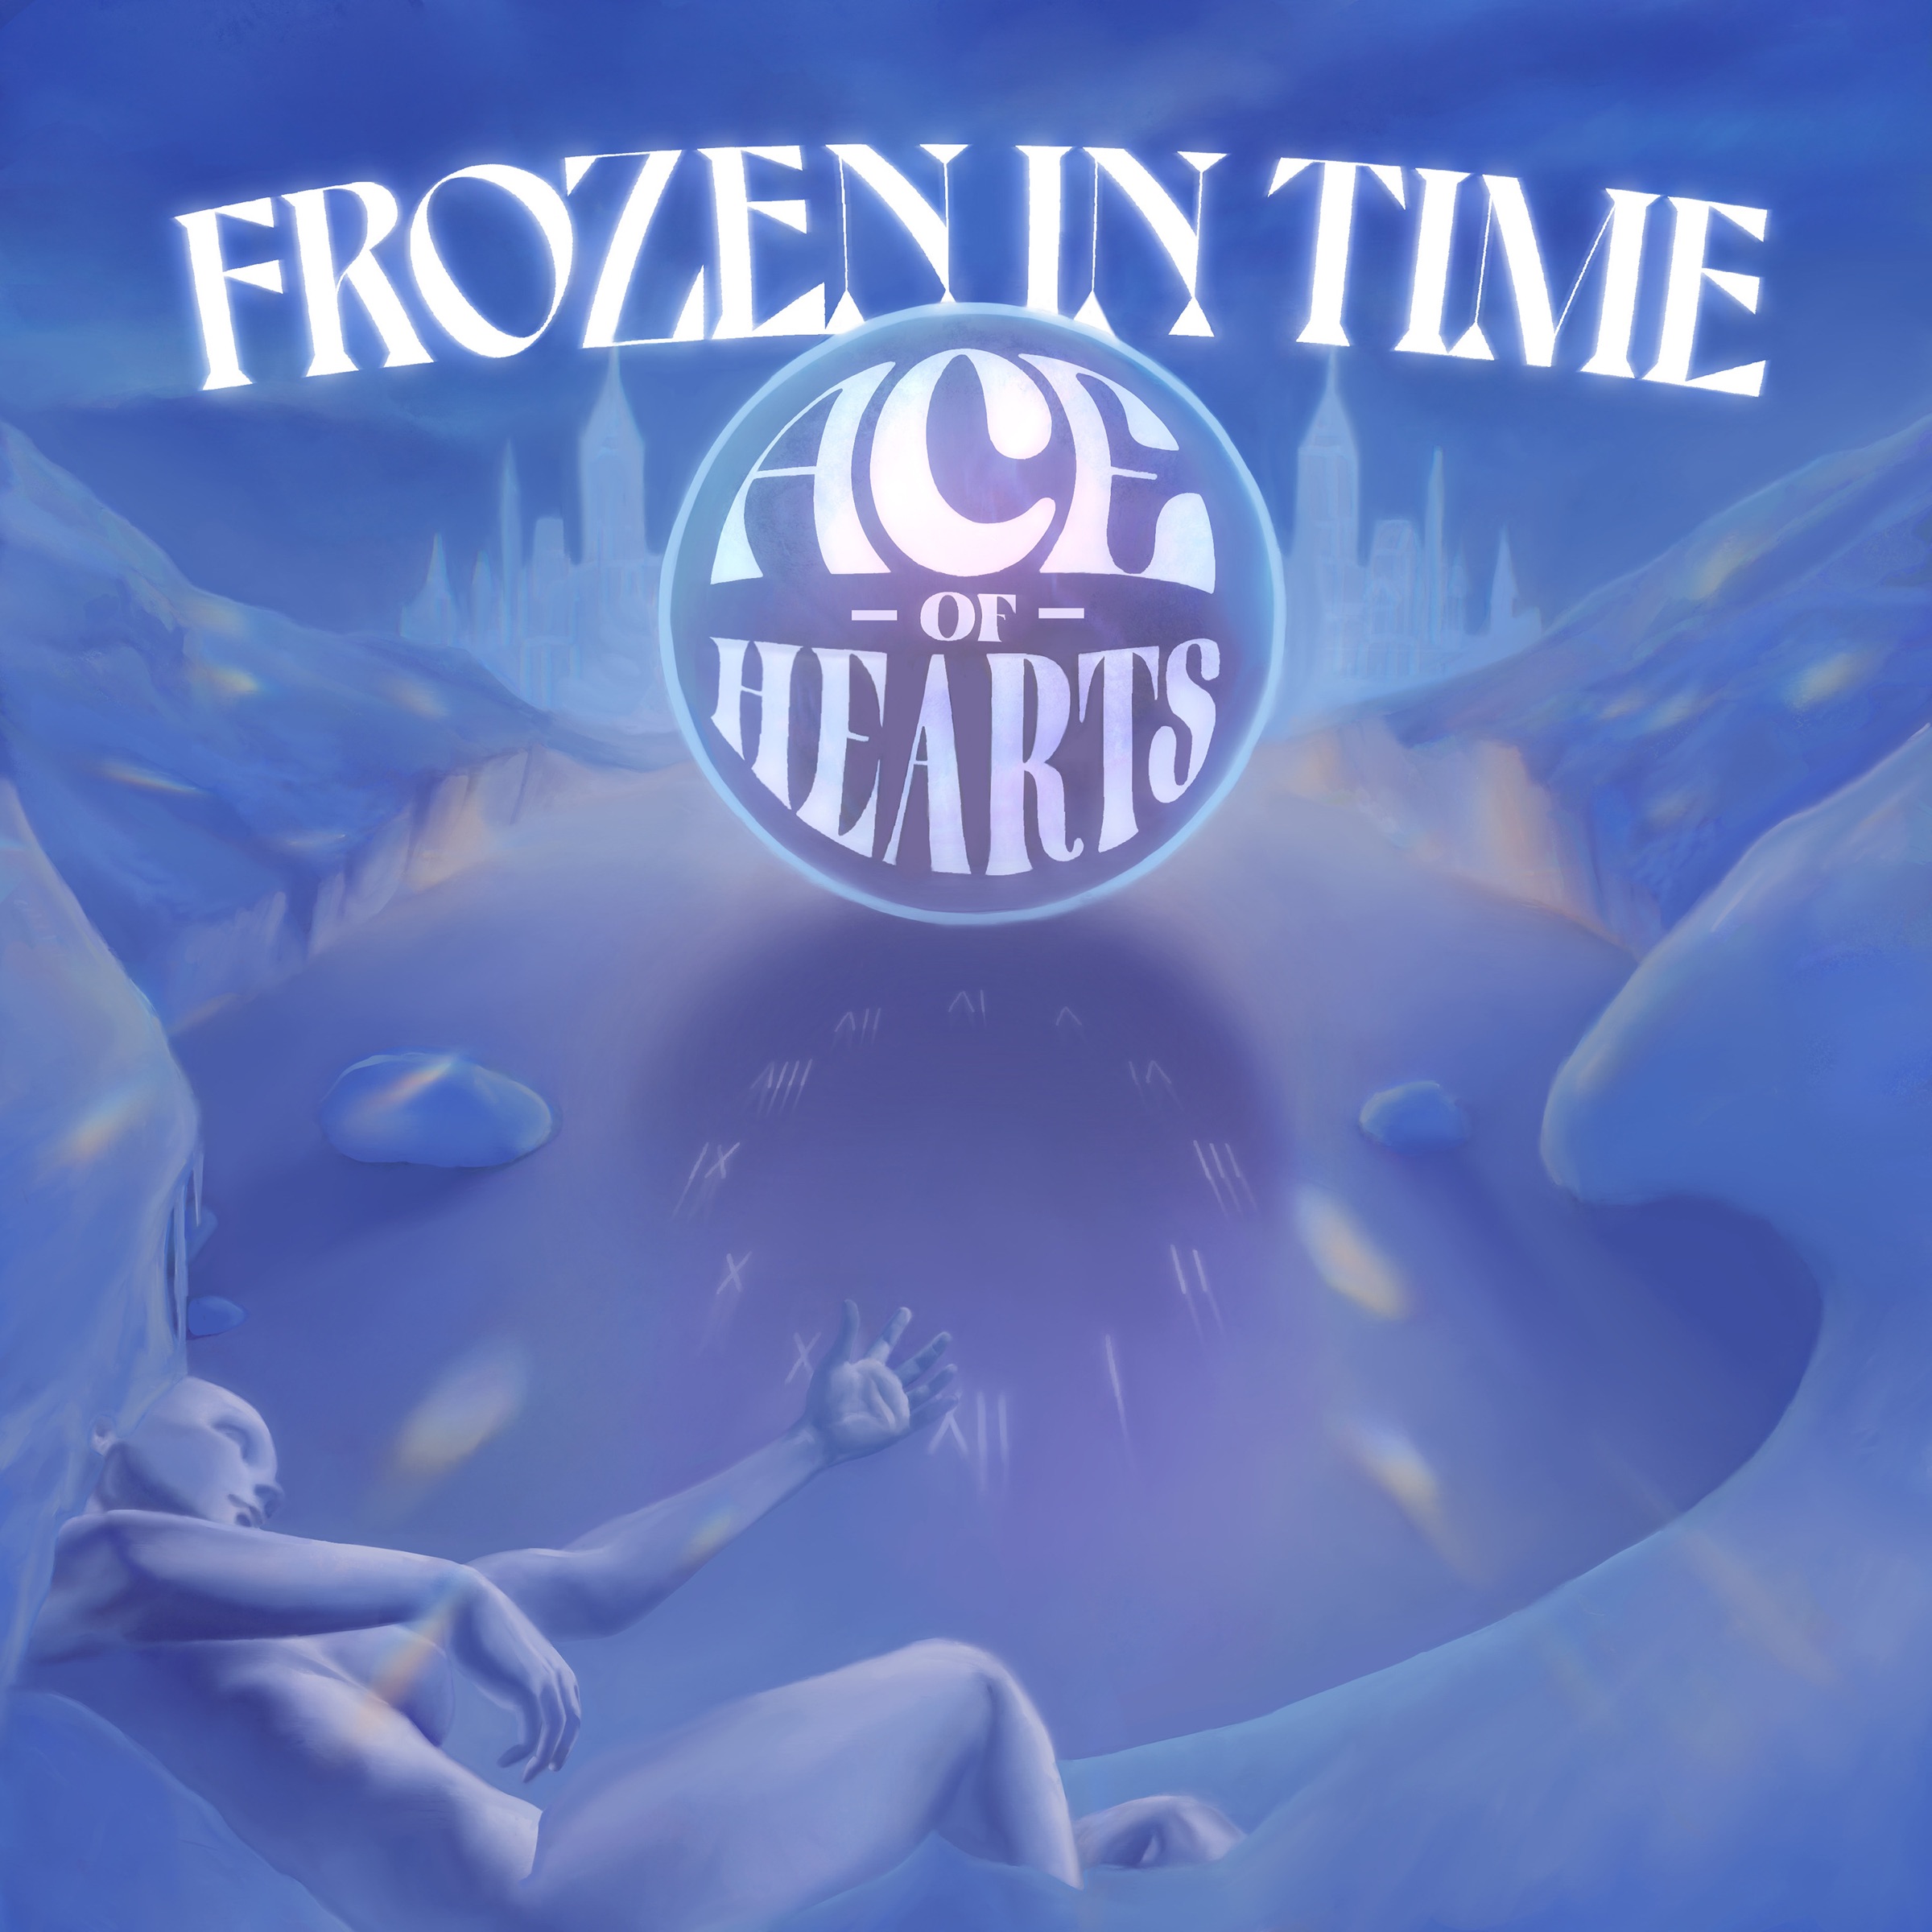 Ace of Hearts Frozen in Time cover artwork